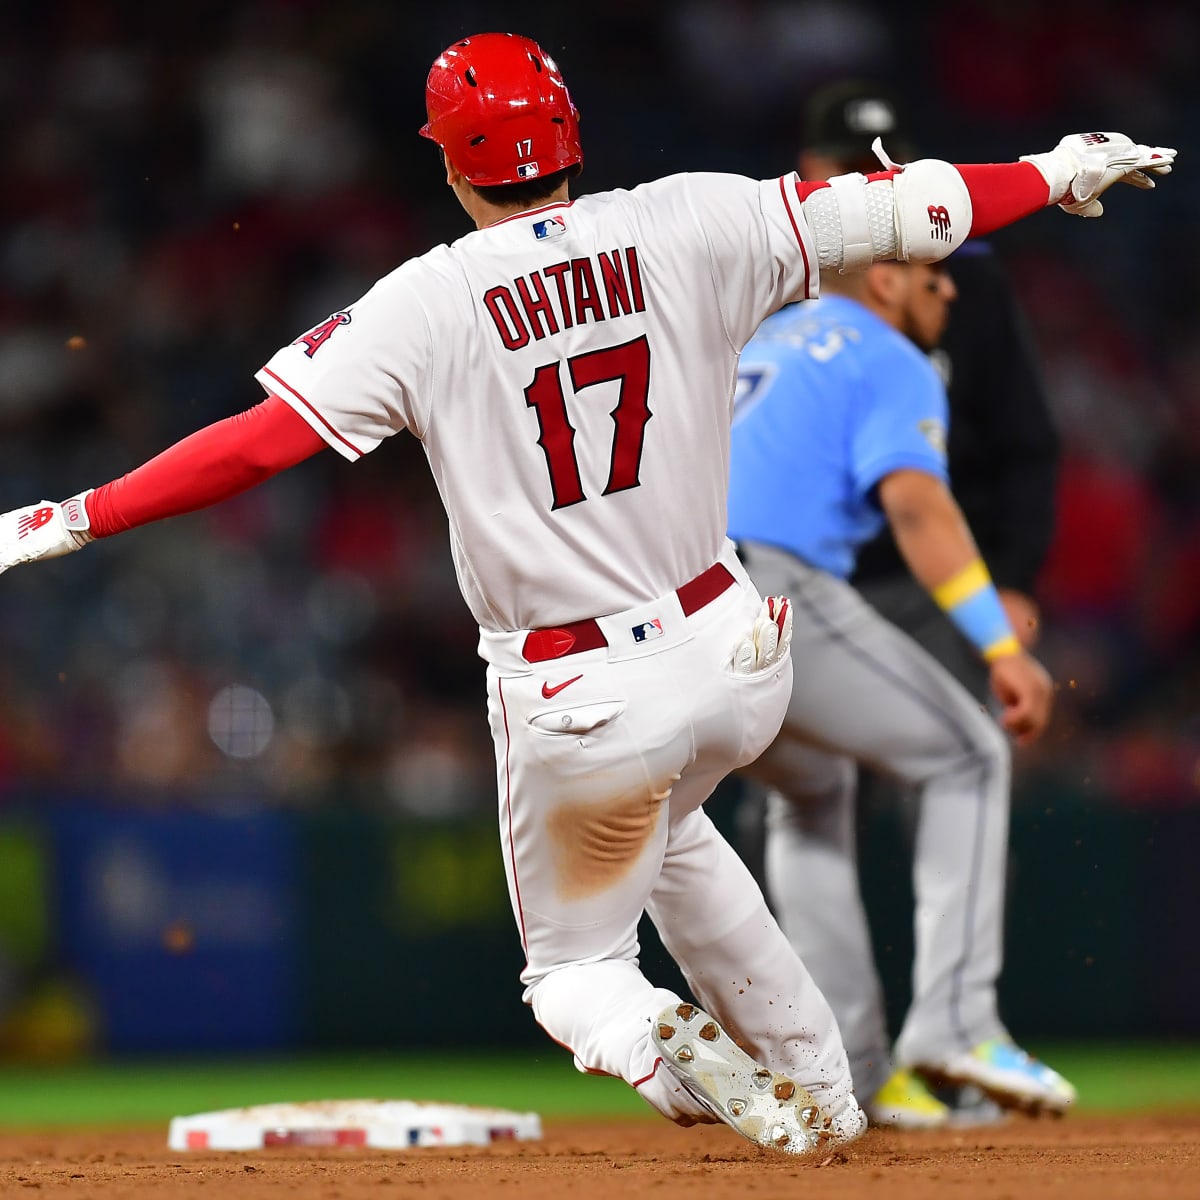 Reds spoil Mike Trout's return to the Angels' lineup